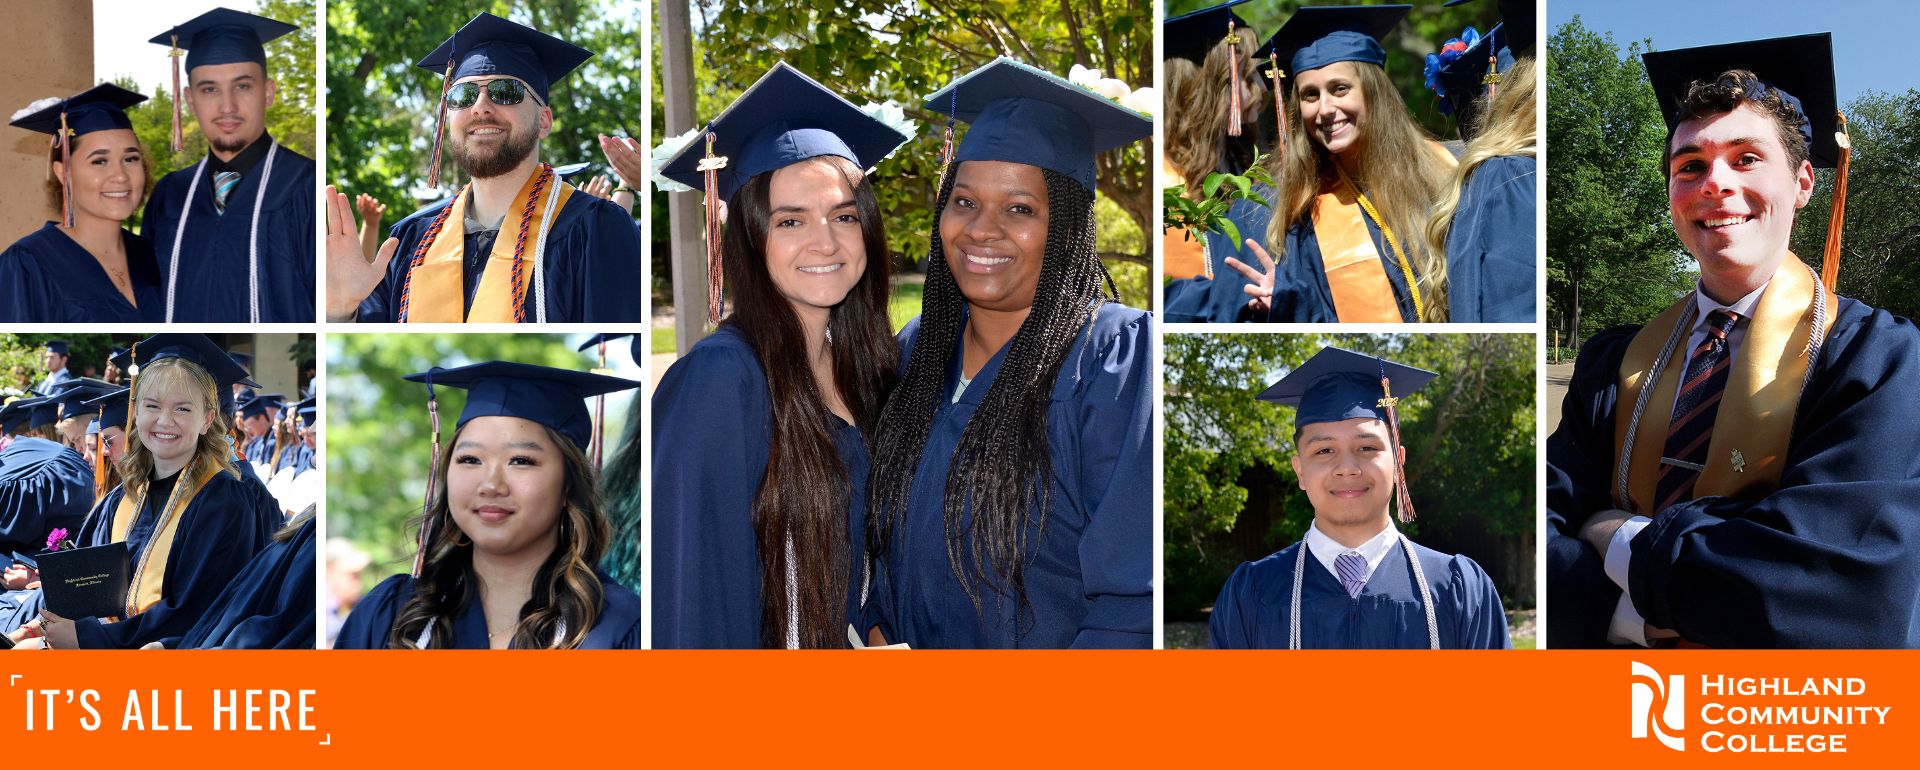 Eight shots of Highland grads posing for the camera. An orange bar at the bottom contains the It's All Here and HCC logos.